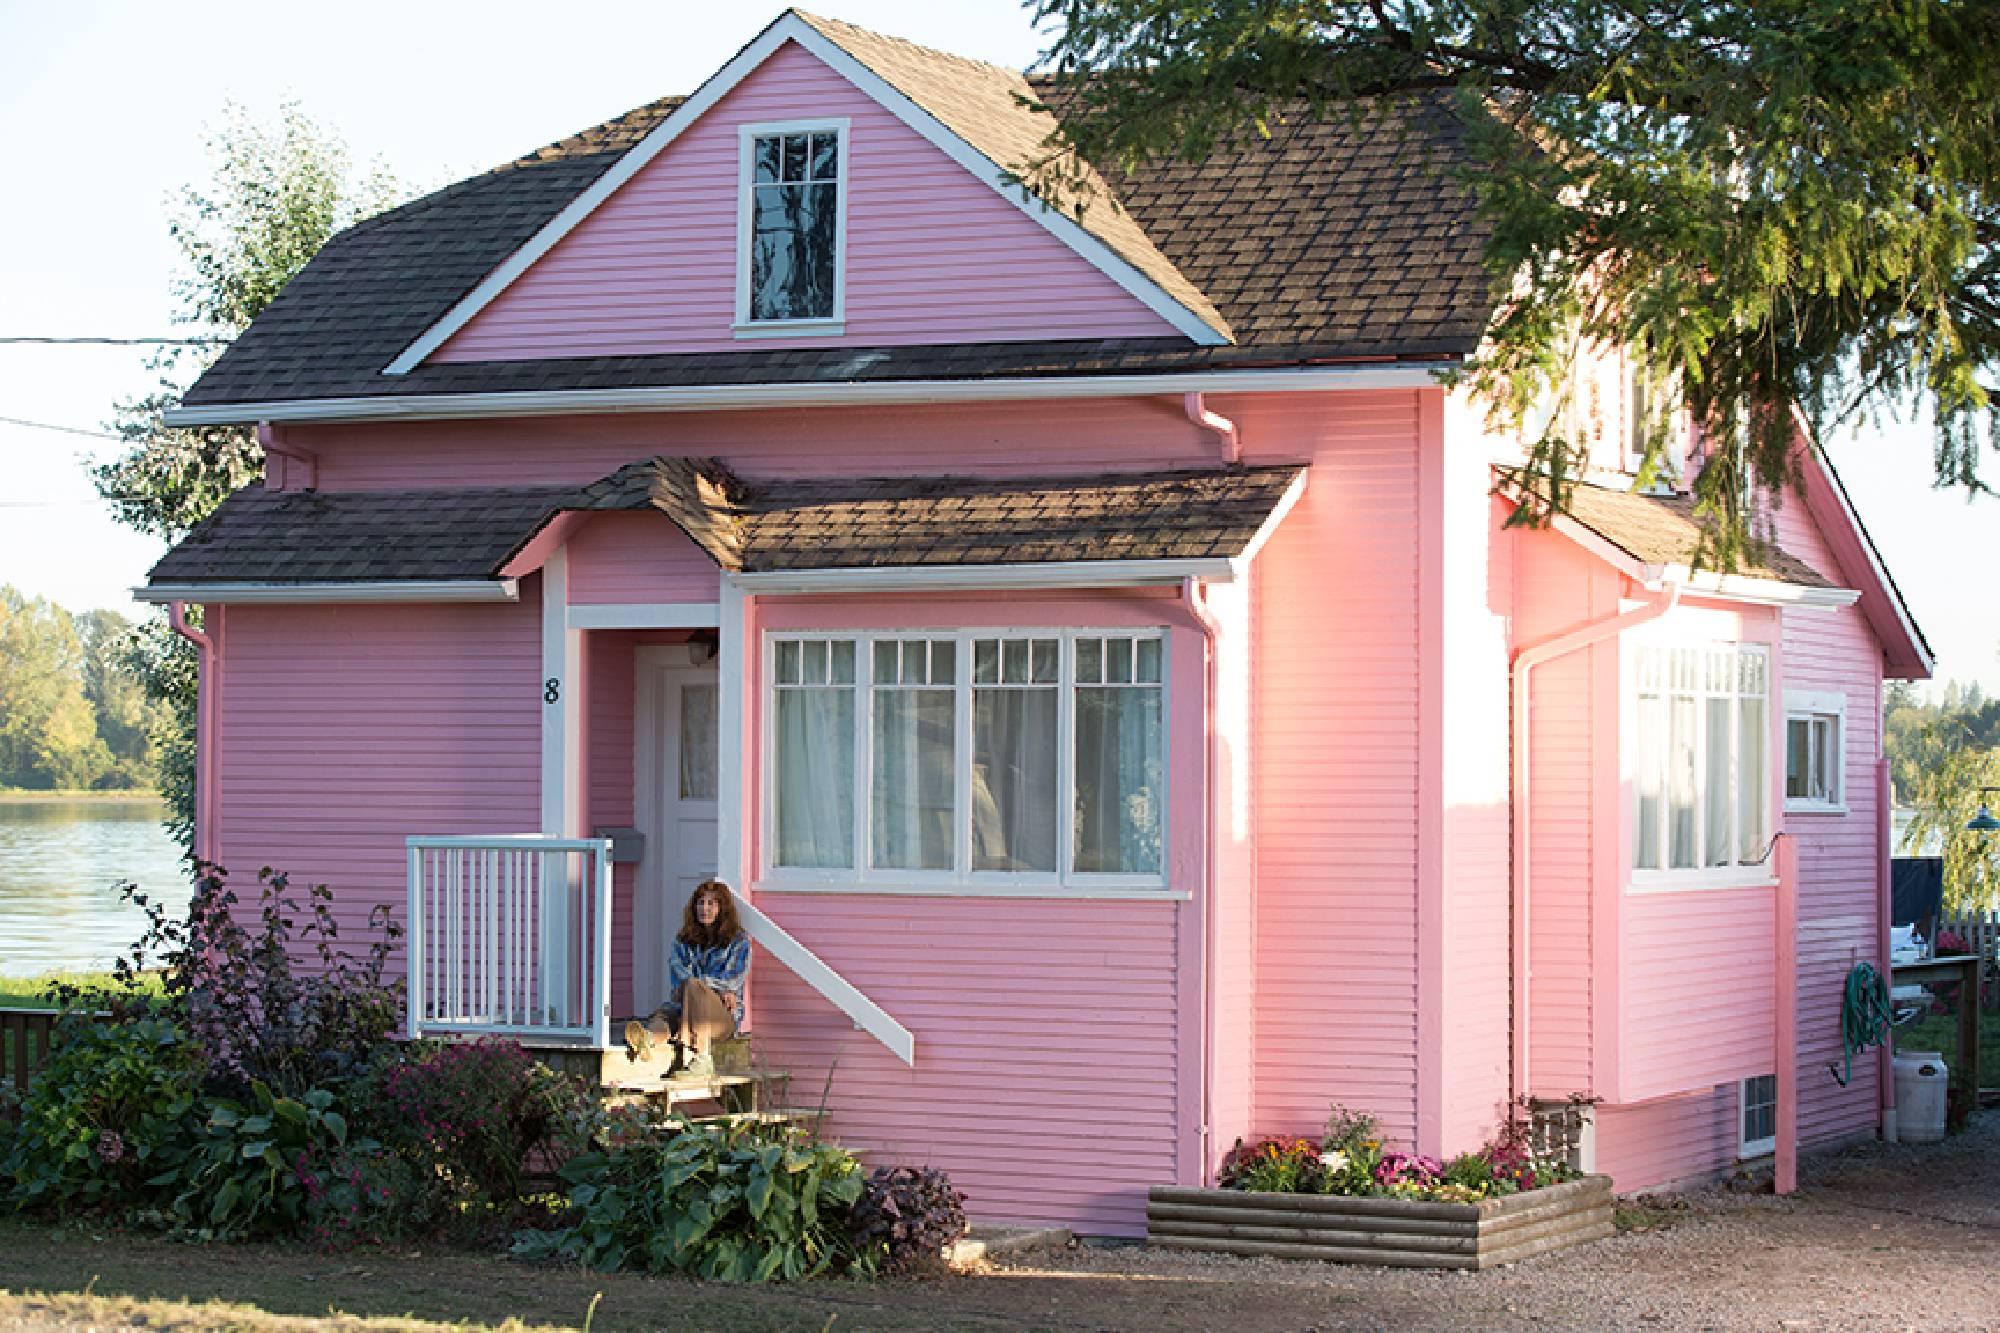 'The Little Pink House' Isn't For You Or Me KUNC